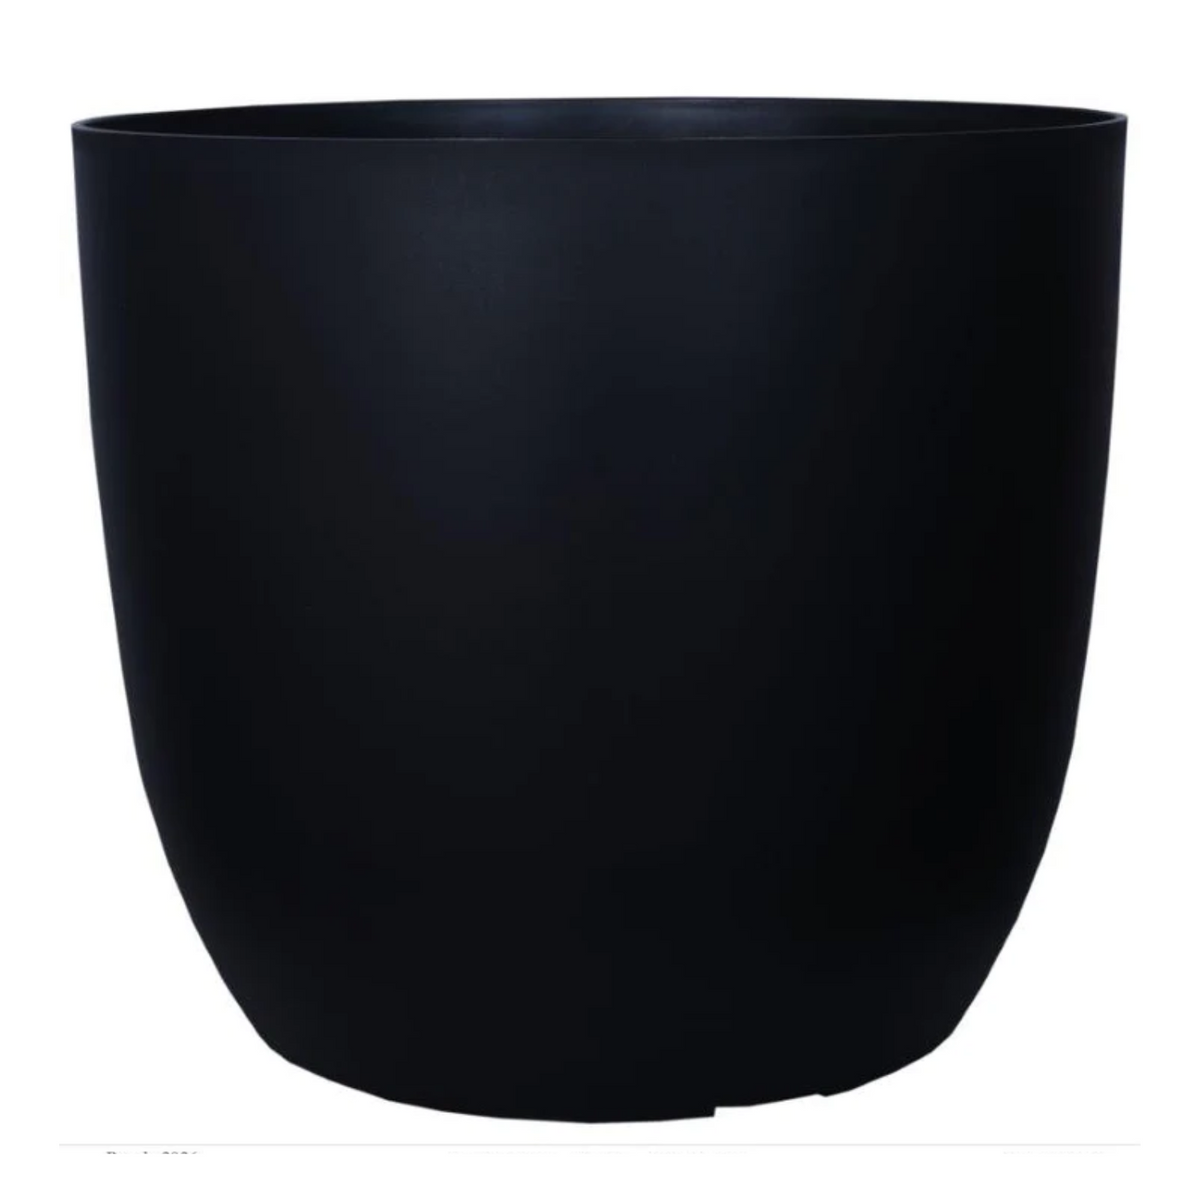 Ronda 2926 Round Plastic Pot (Without Self-Watering Kit)